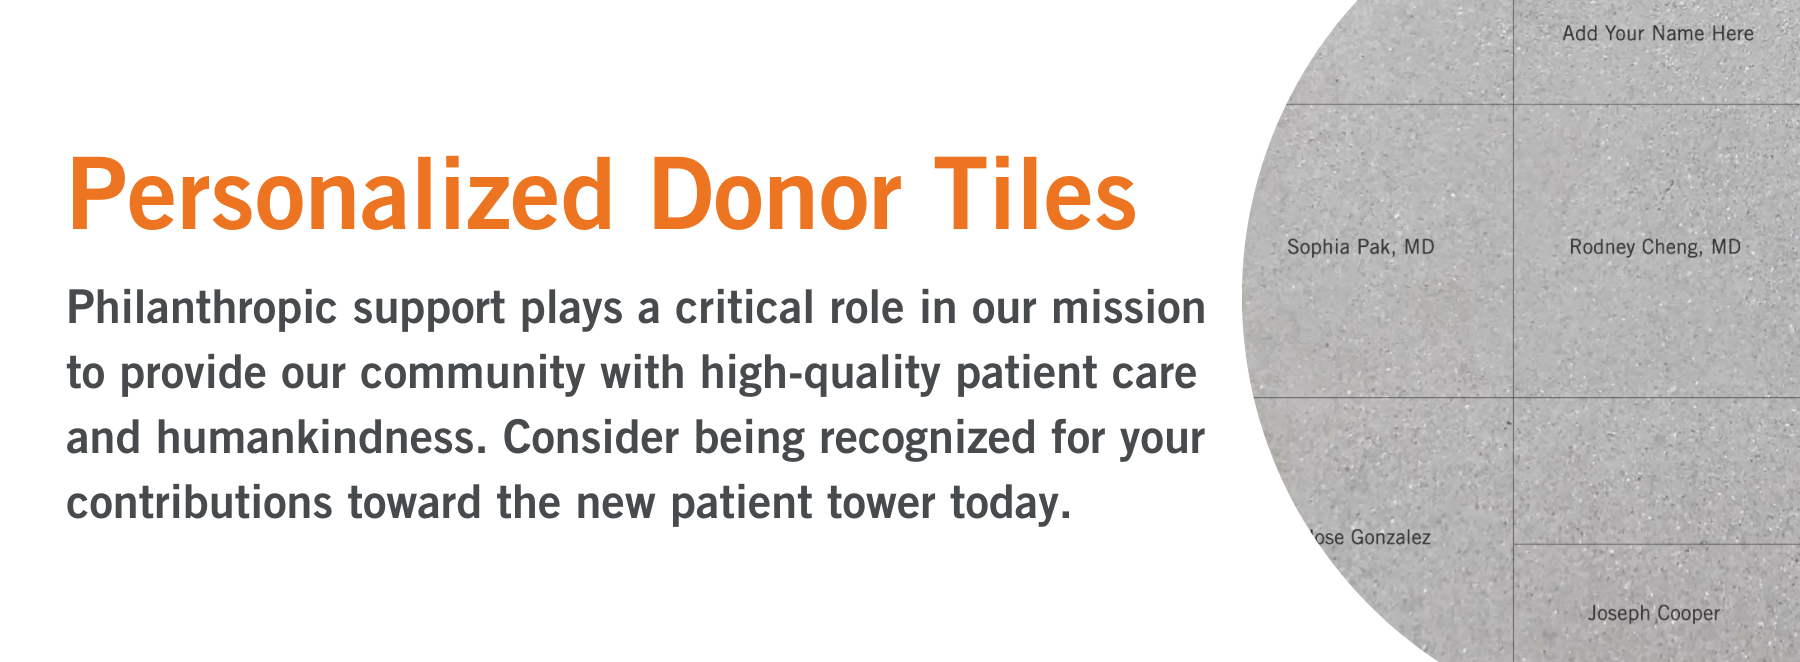 Donor Tile landing page banner image